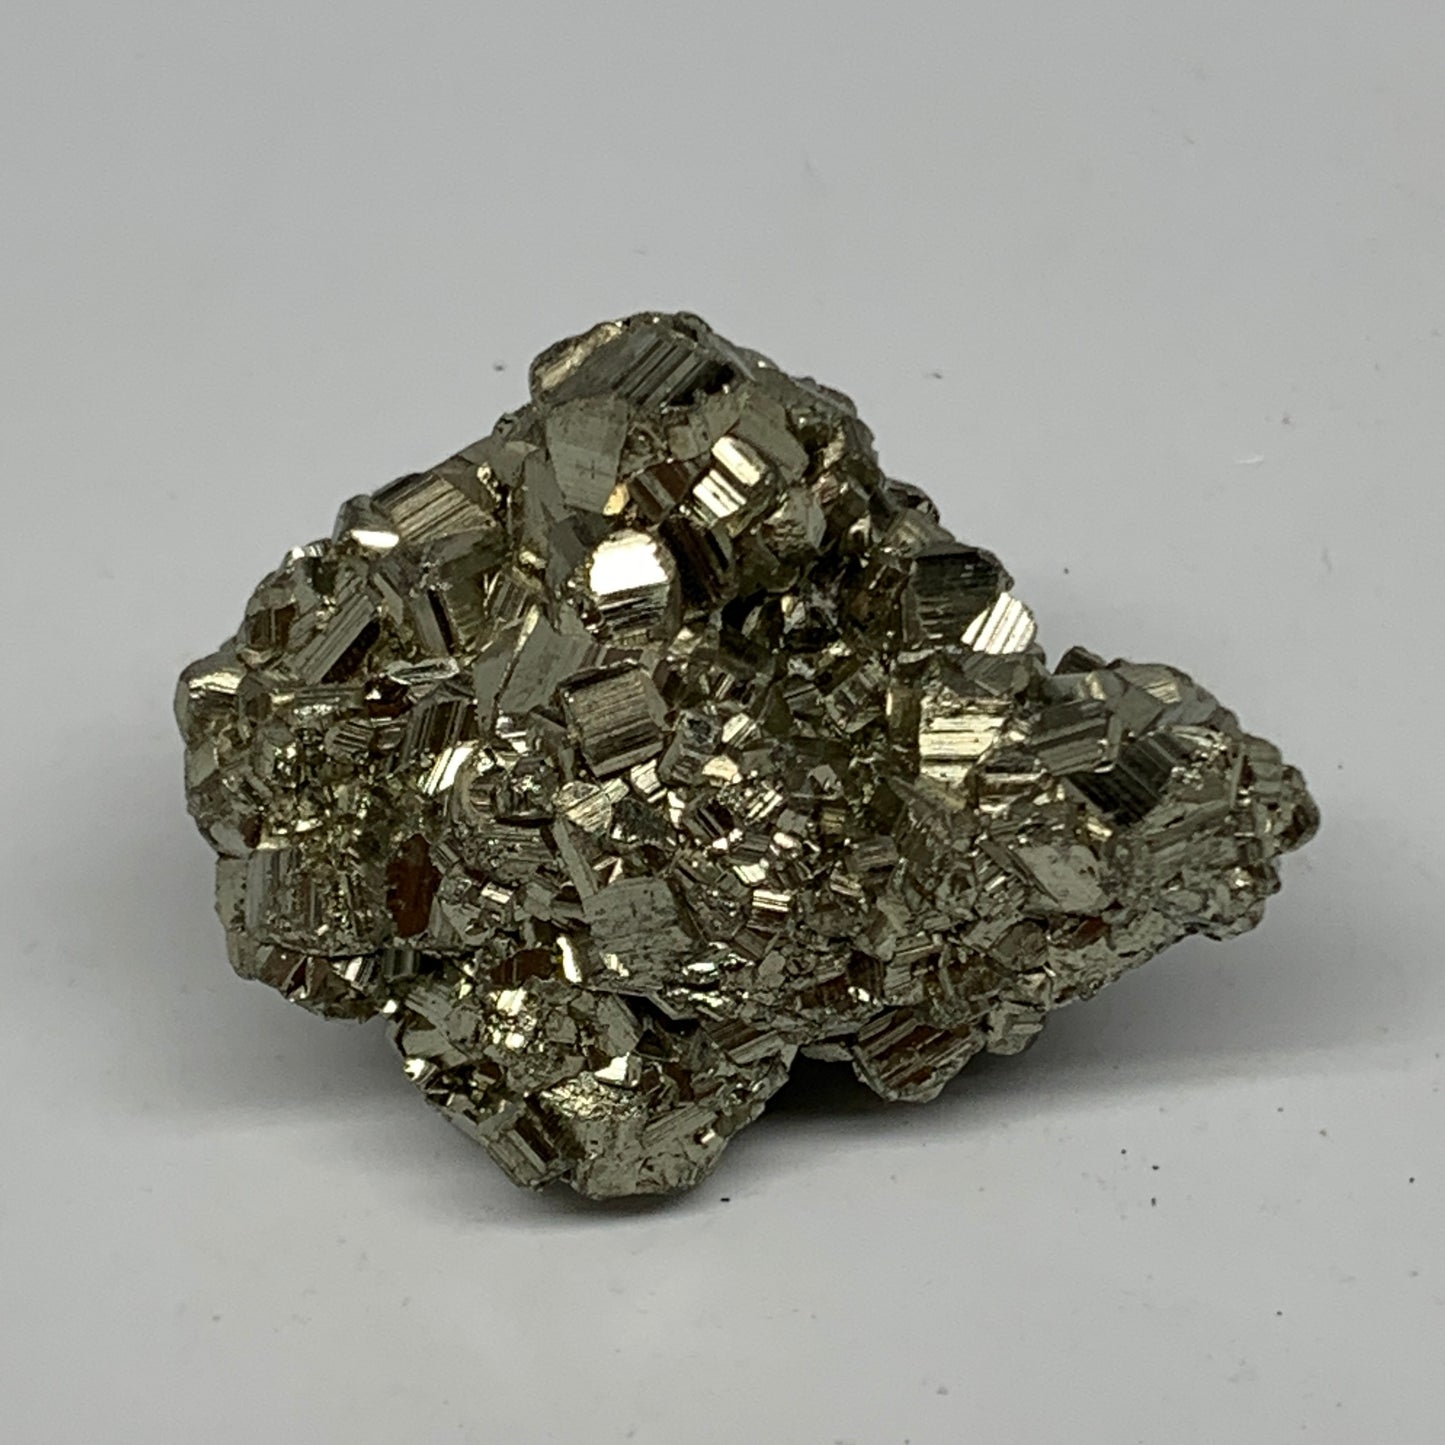 86.6g, 1.9"x1.6"x1.4", Natural Untreated Pyrite Cluster Mineral Specimens,B19390